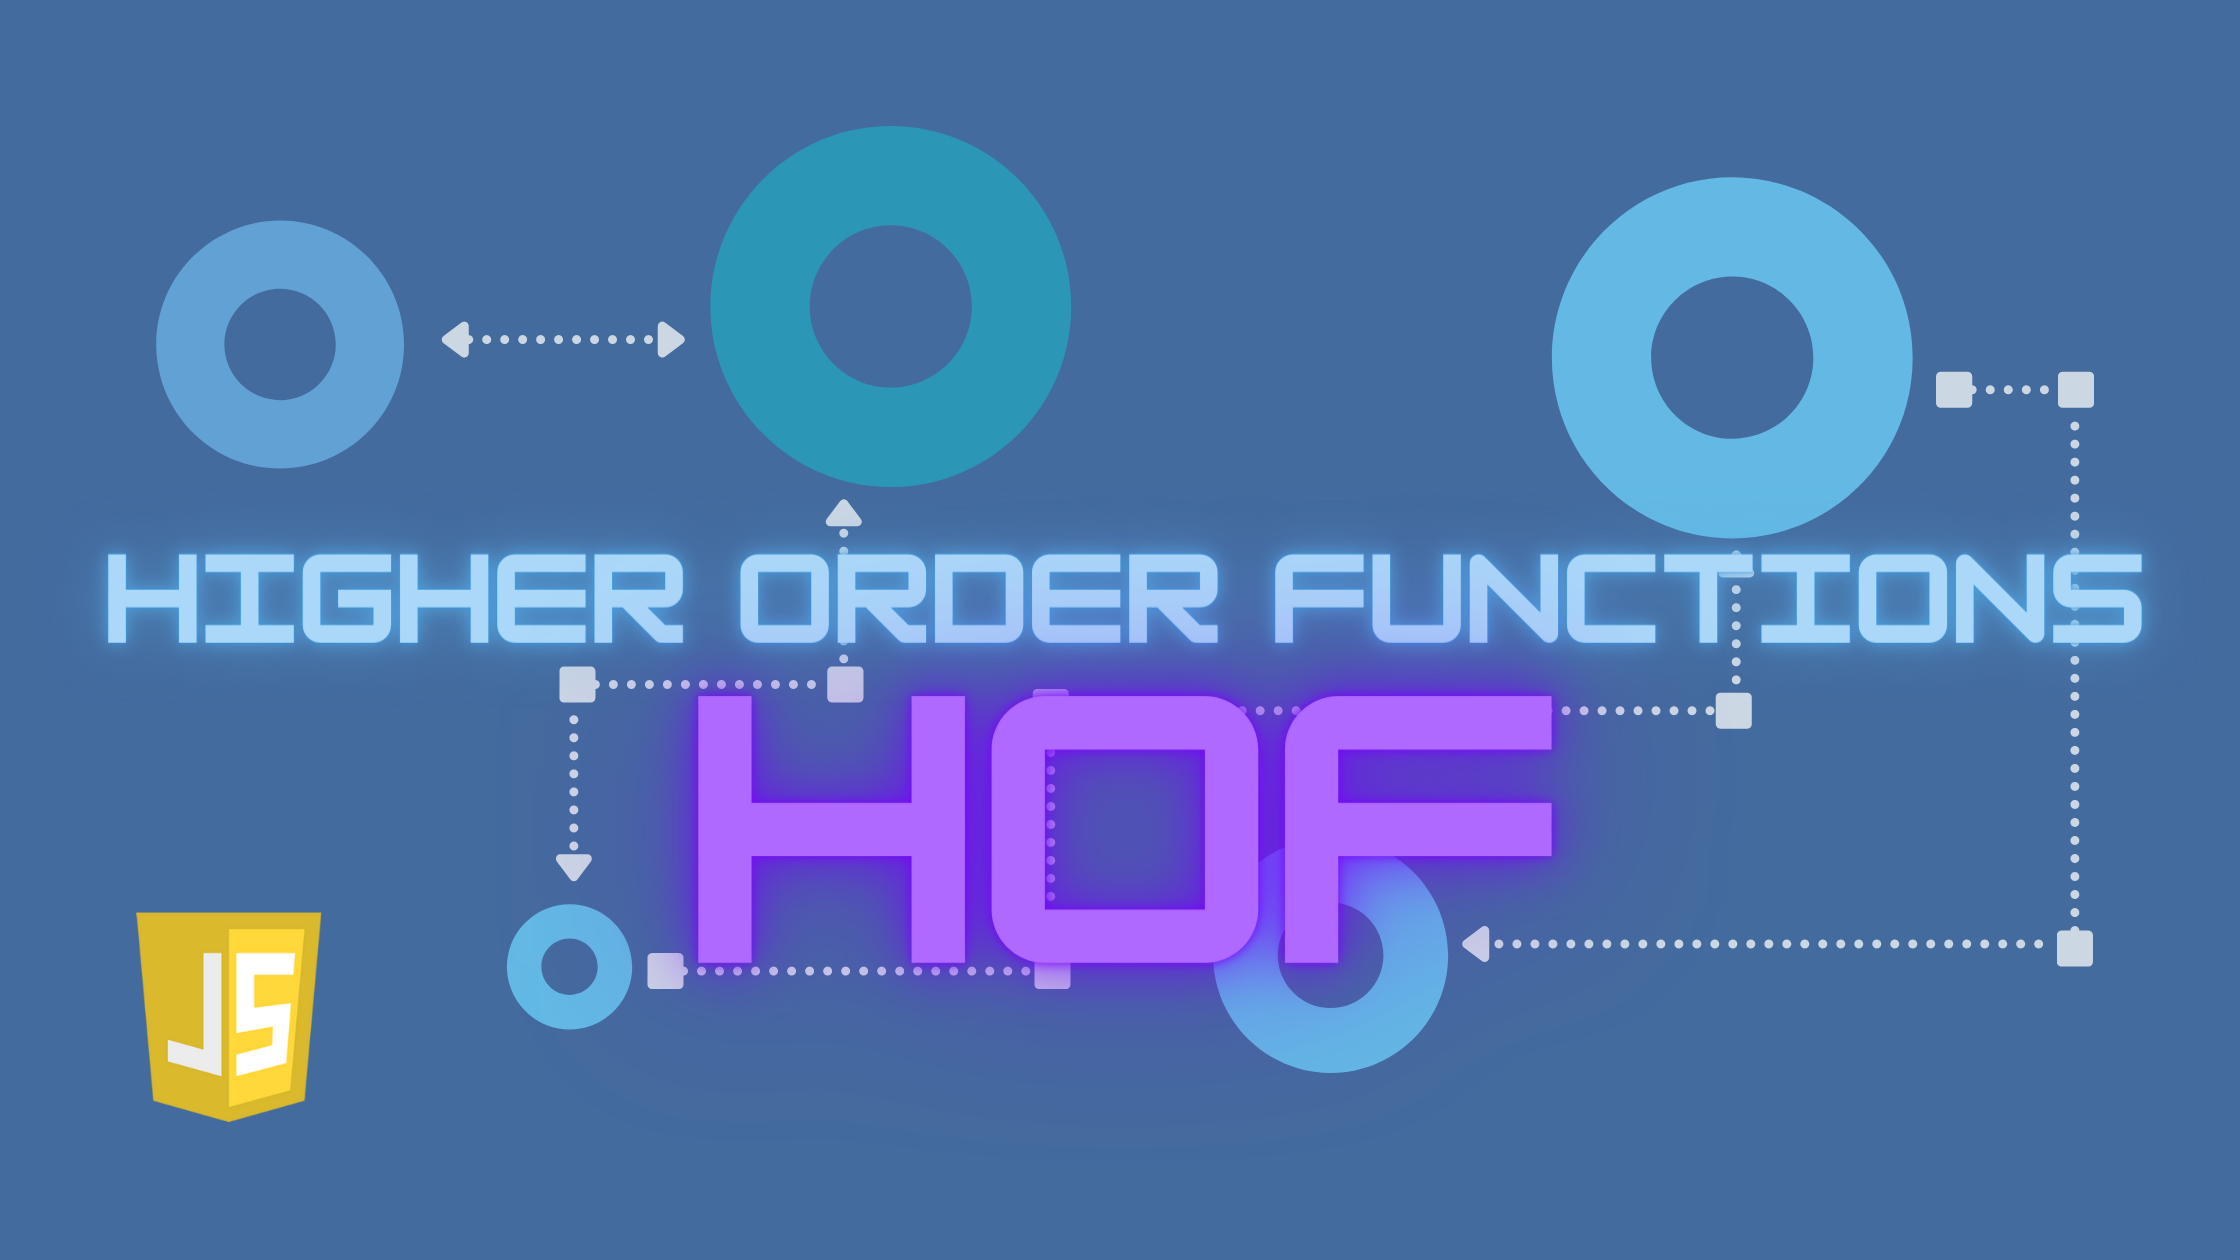 Forever Functional: Higher Order Functions -- Functions to rule functions